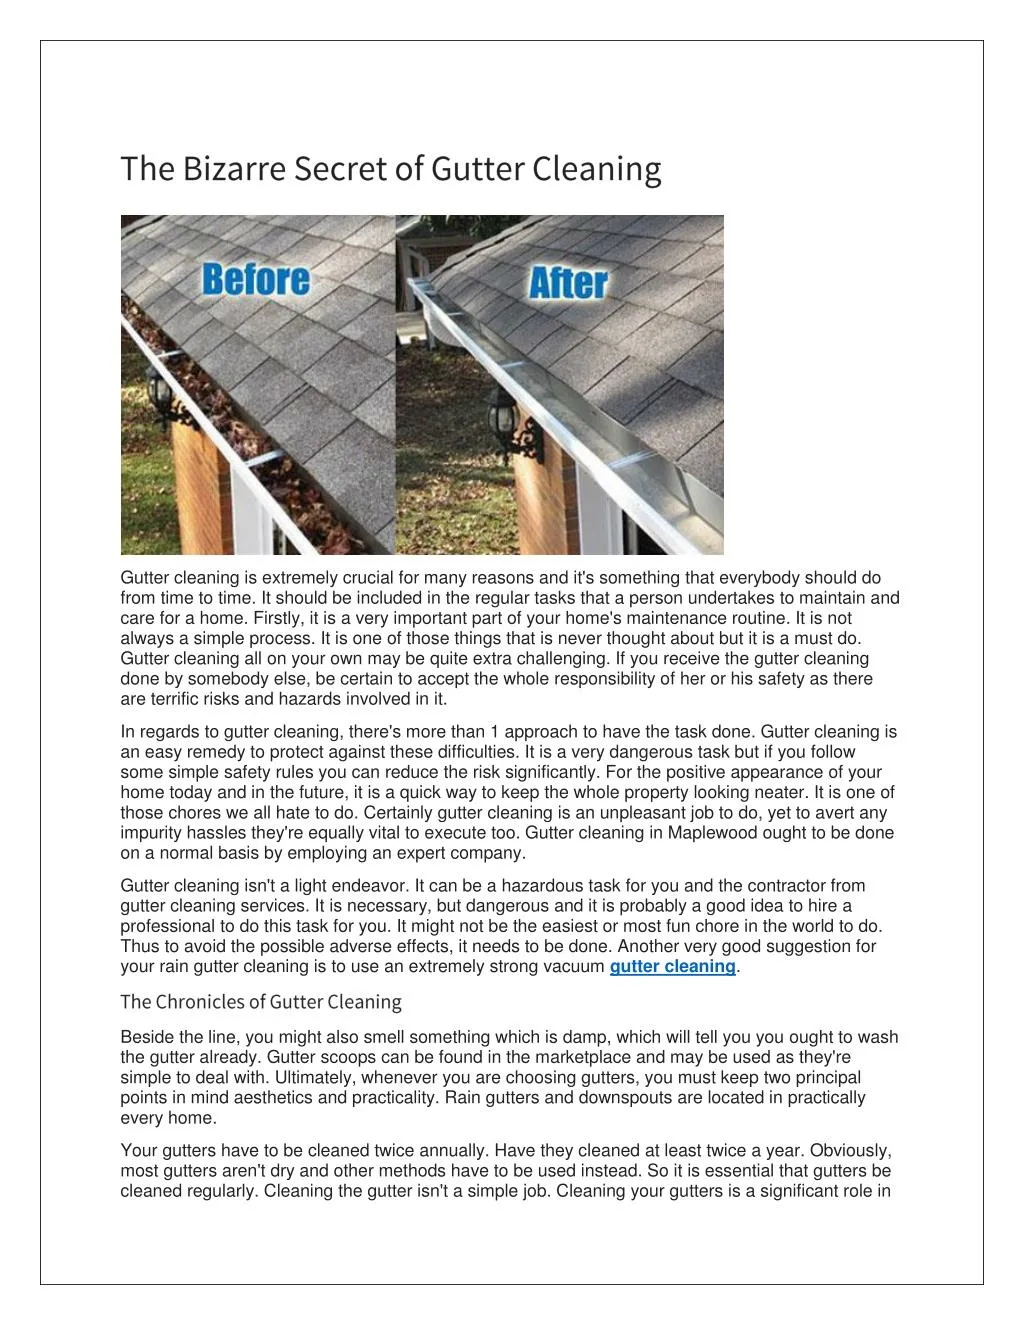 gutter cleaning is extremely crucial for many